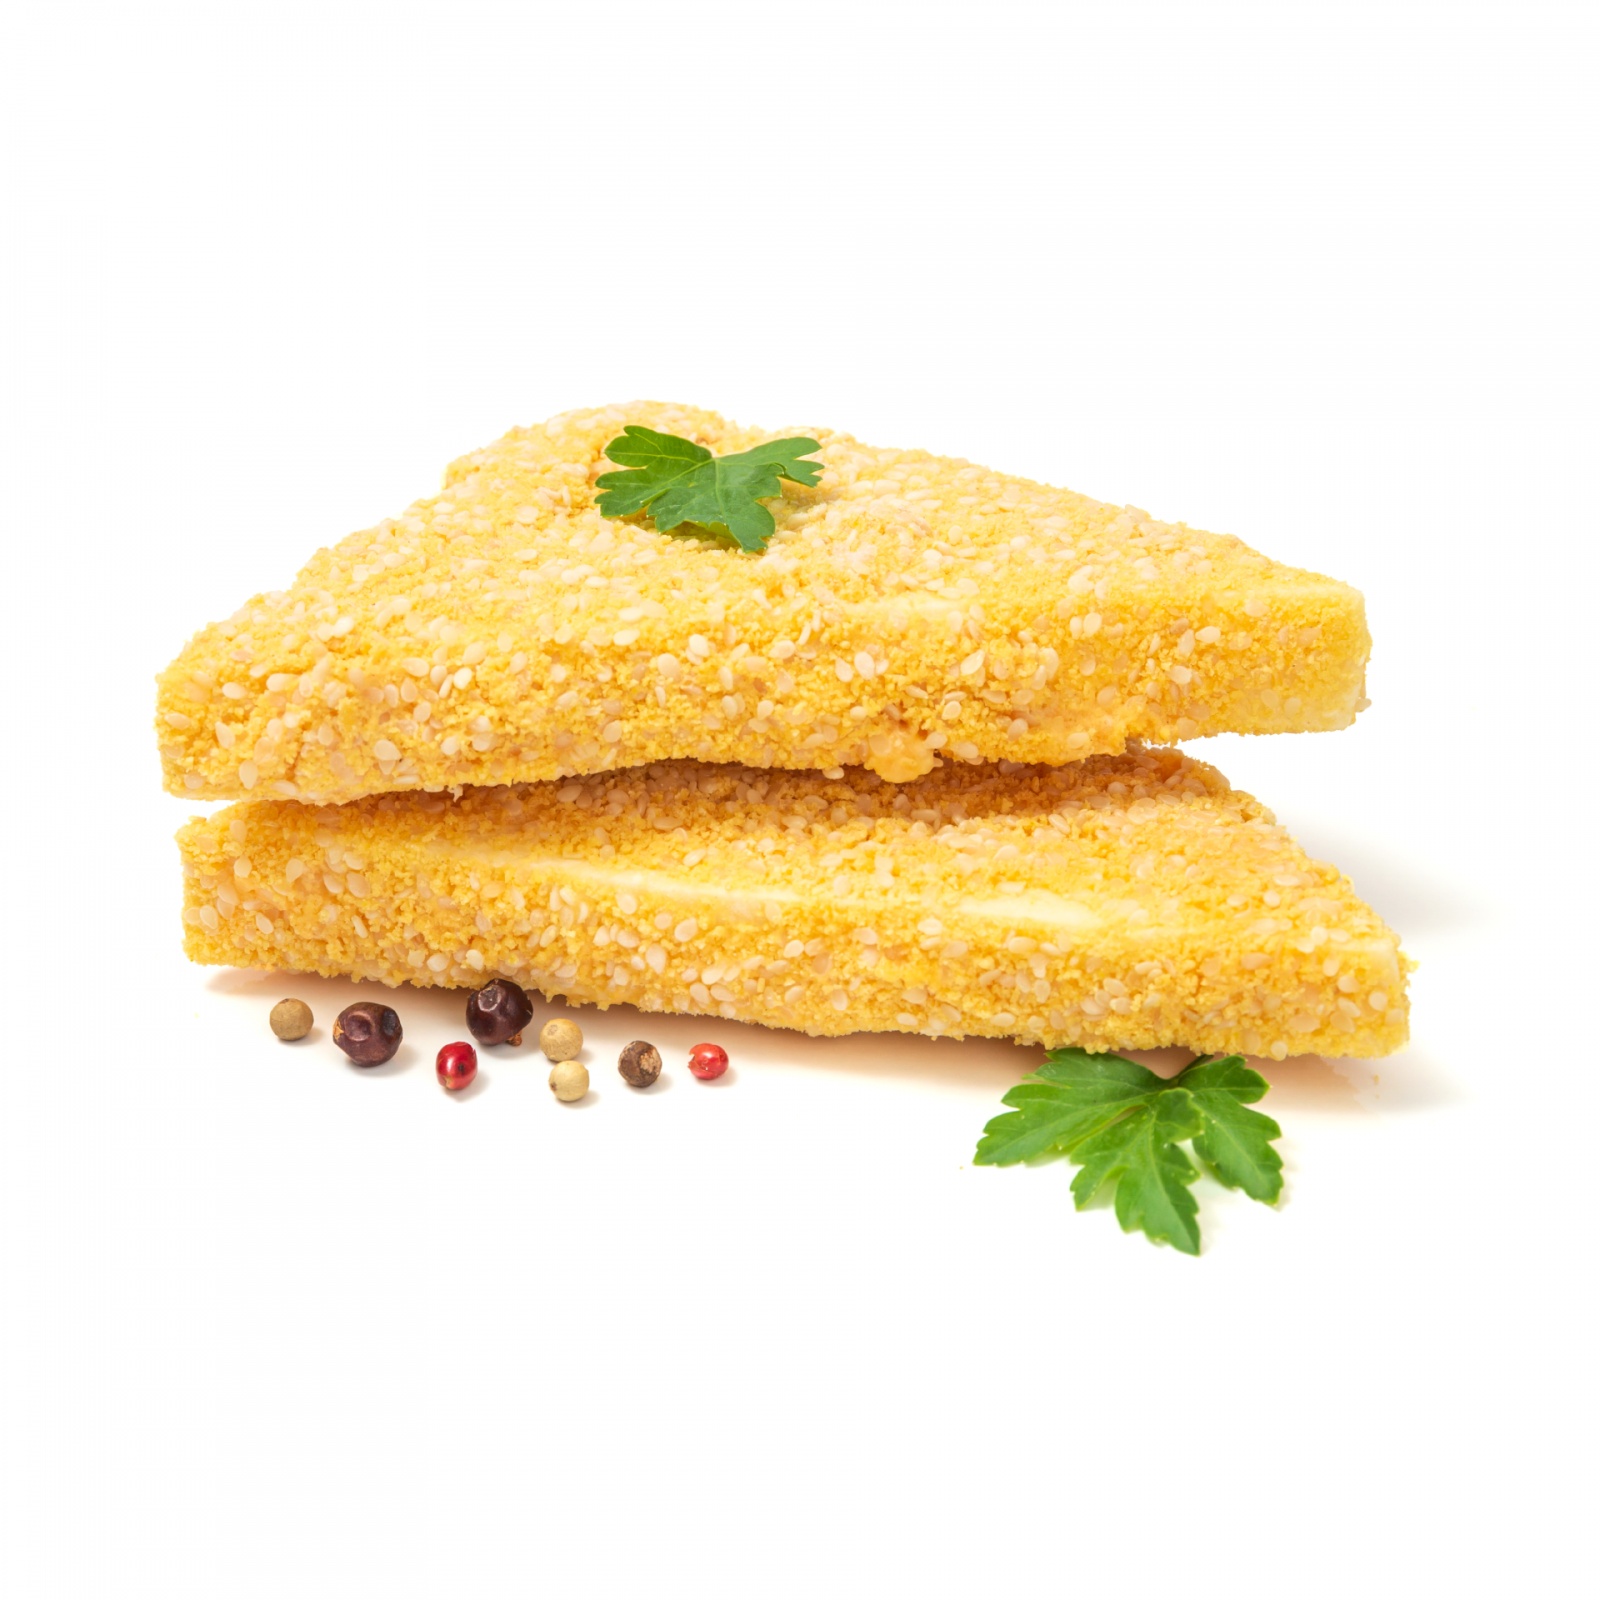 Breaded cheese with sesame seeds